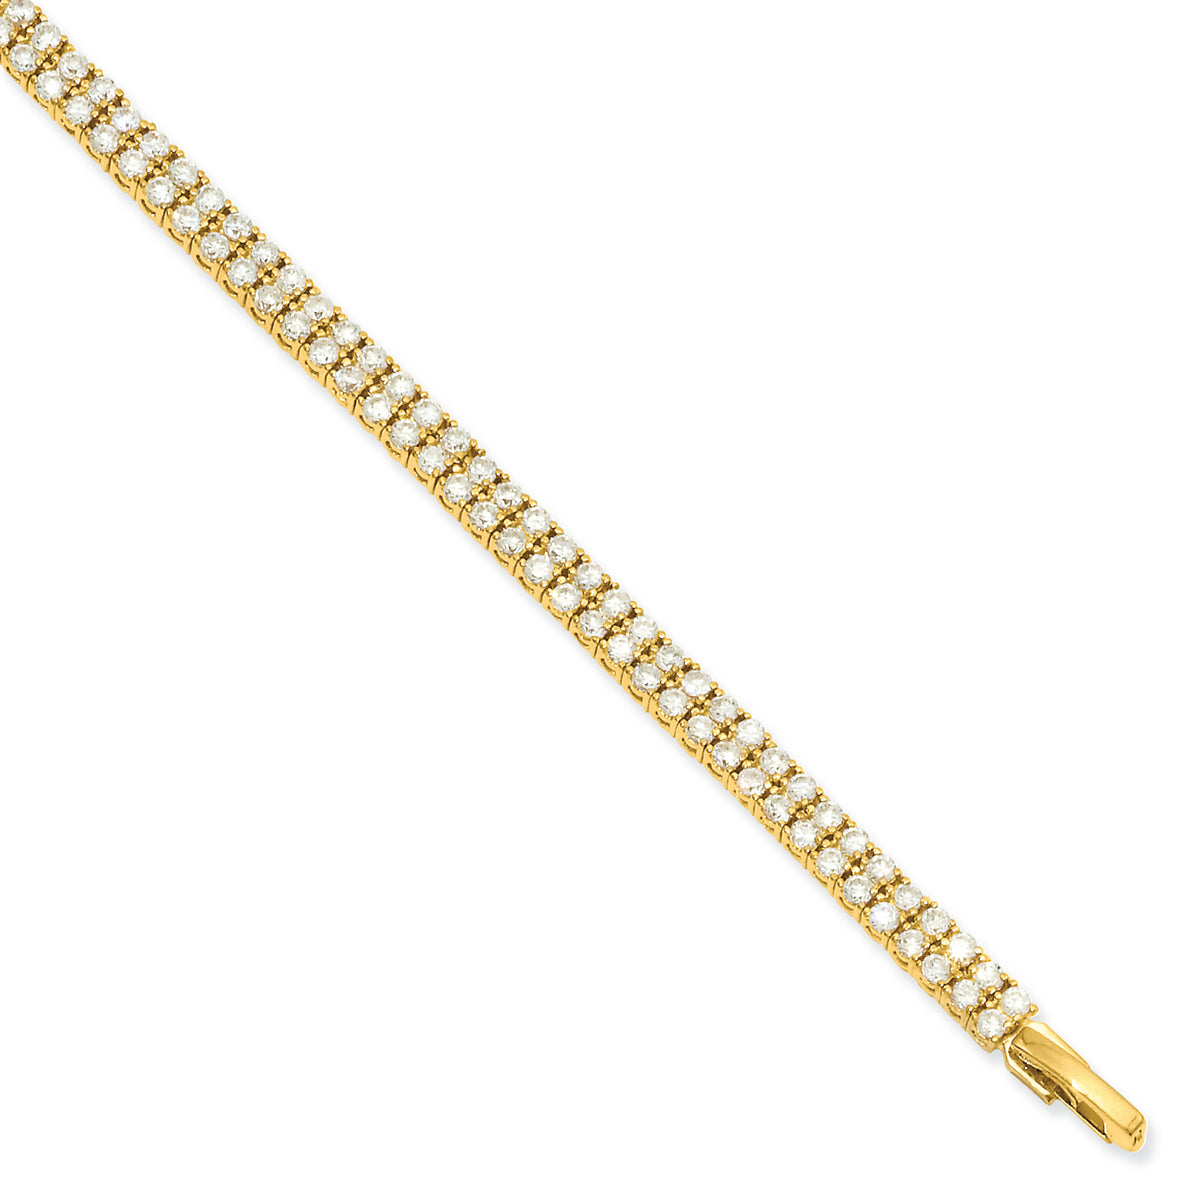 7.25in Gold-plated Kelly Waters Double Row CZ Tennis Bracelet